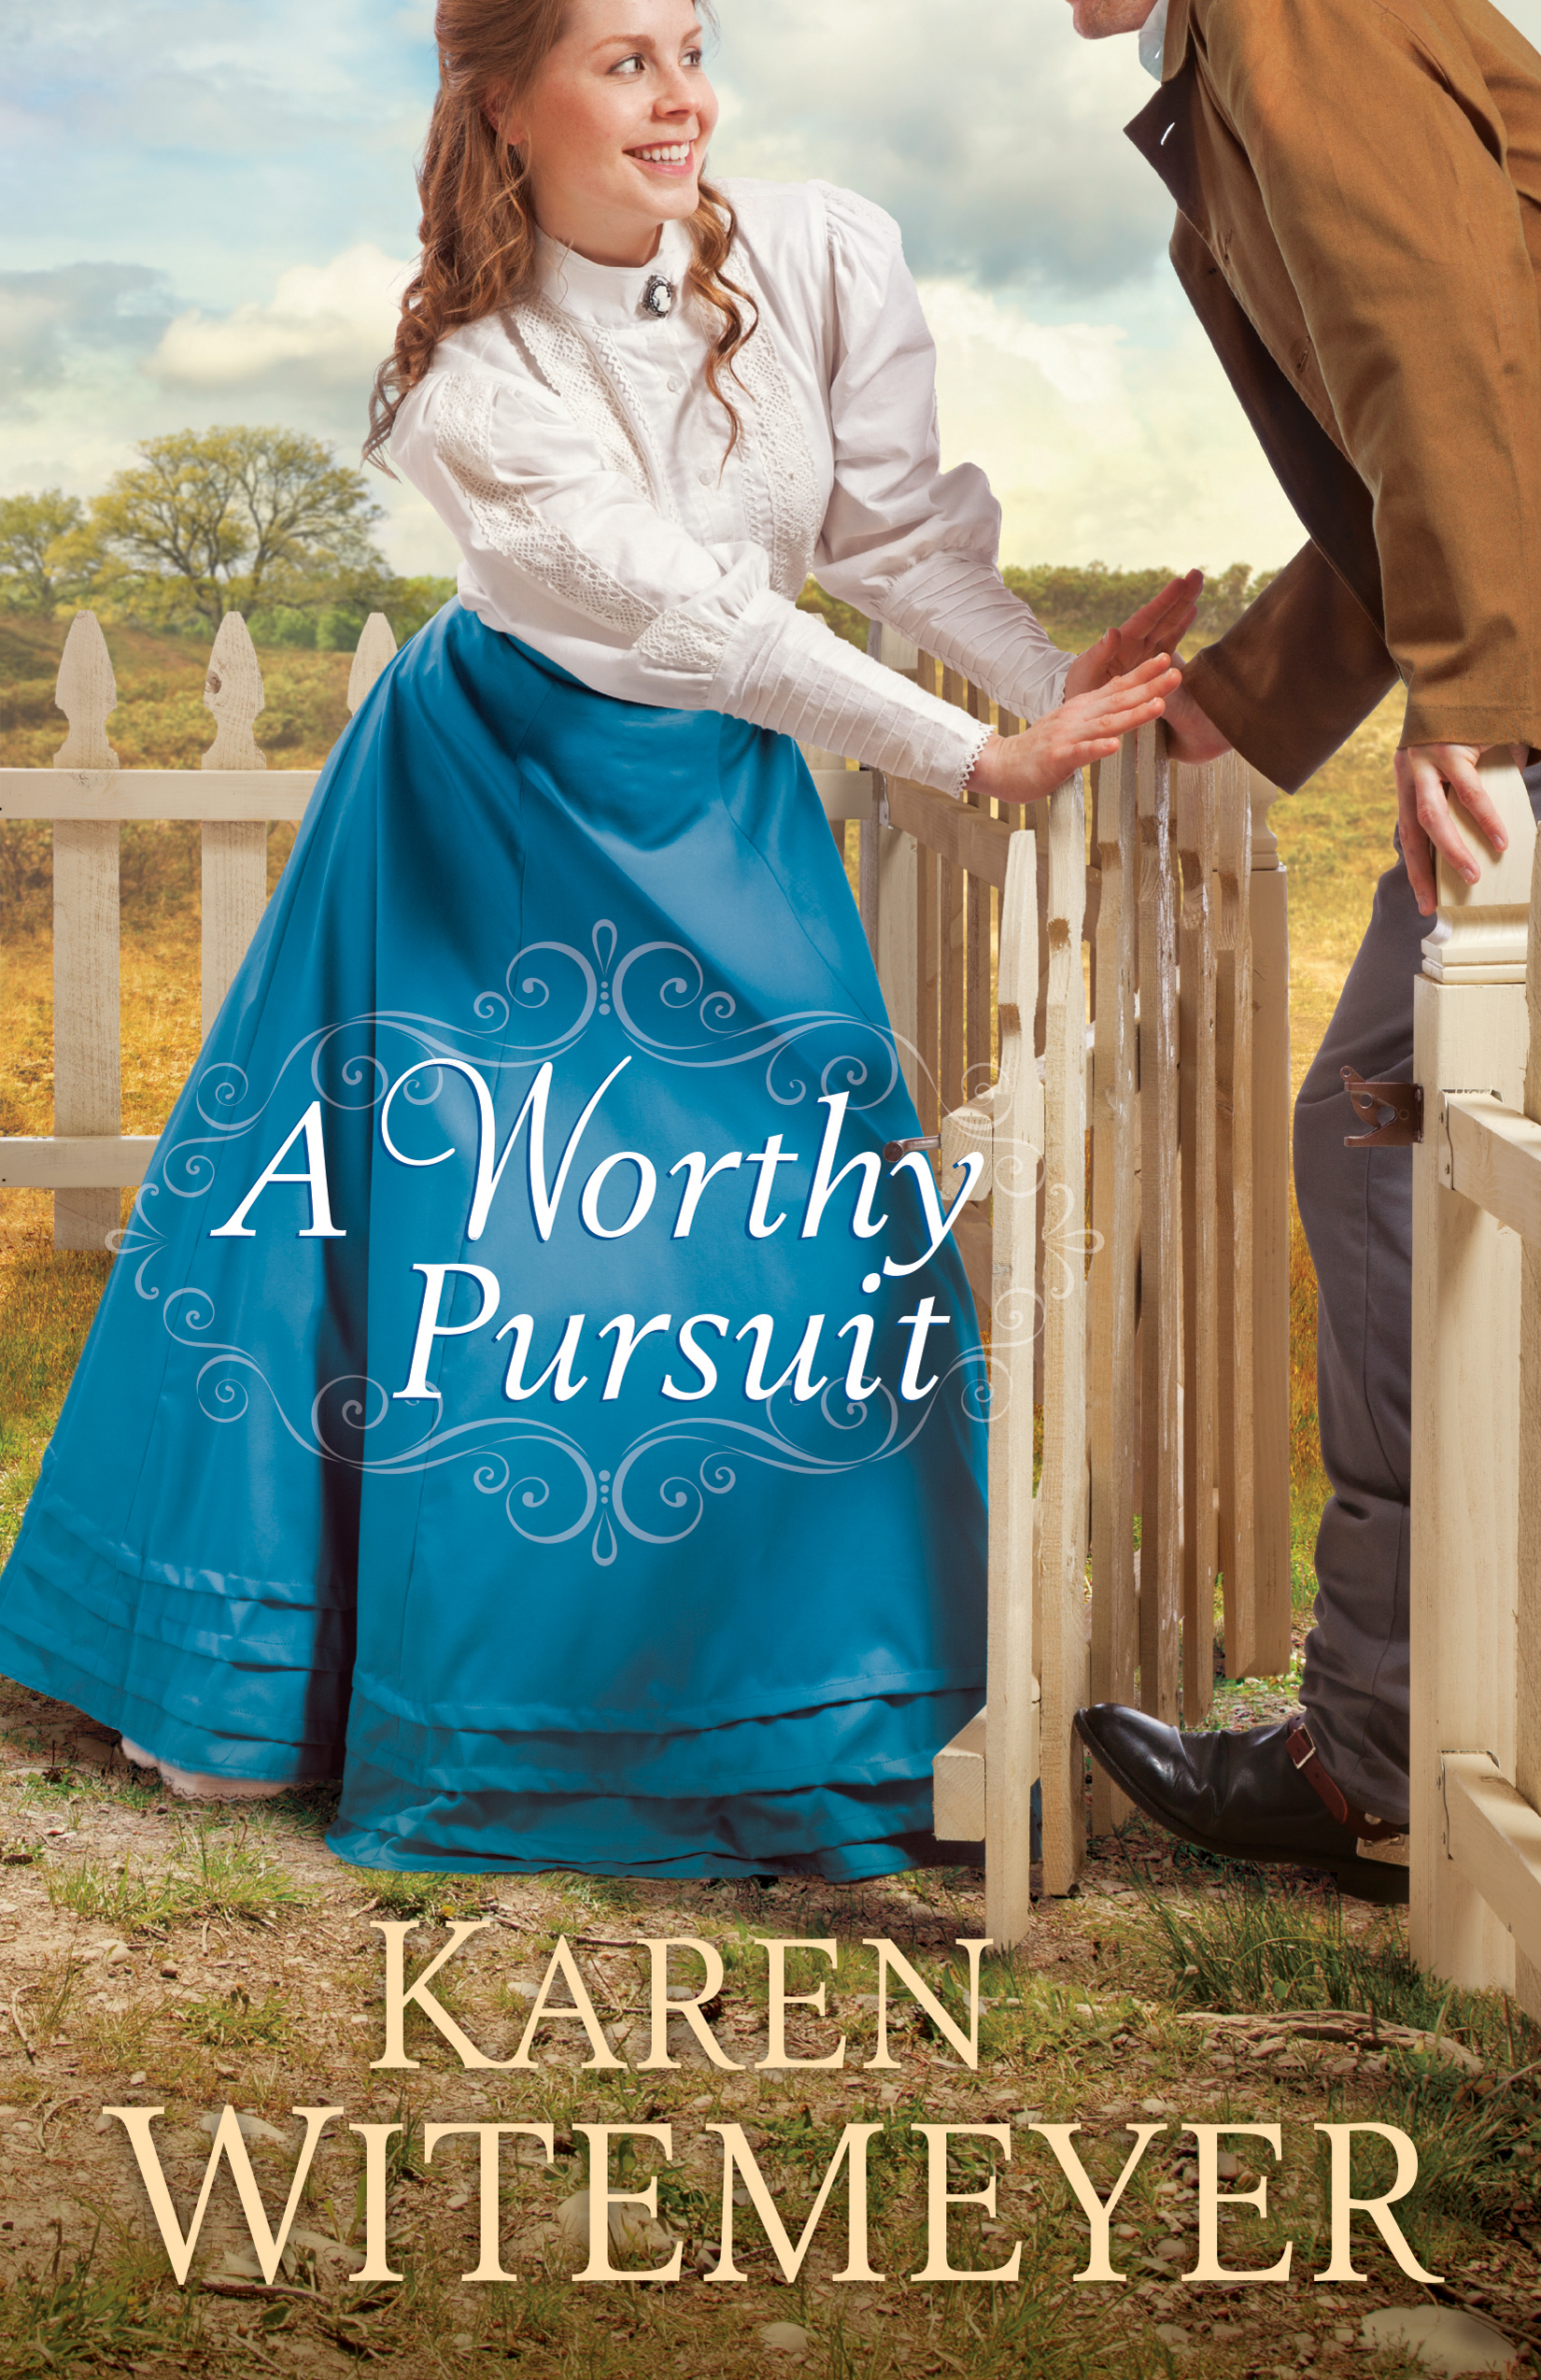 Book Review: A Worthy Pursuit by Karen Witemeyer on www.willbakeforbooks.com